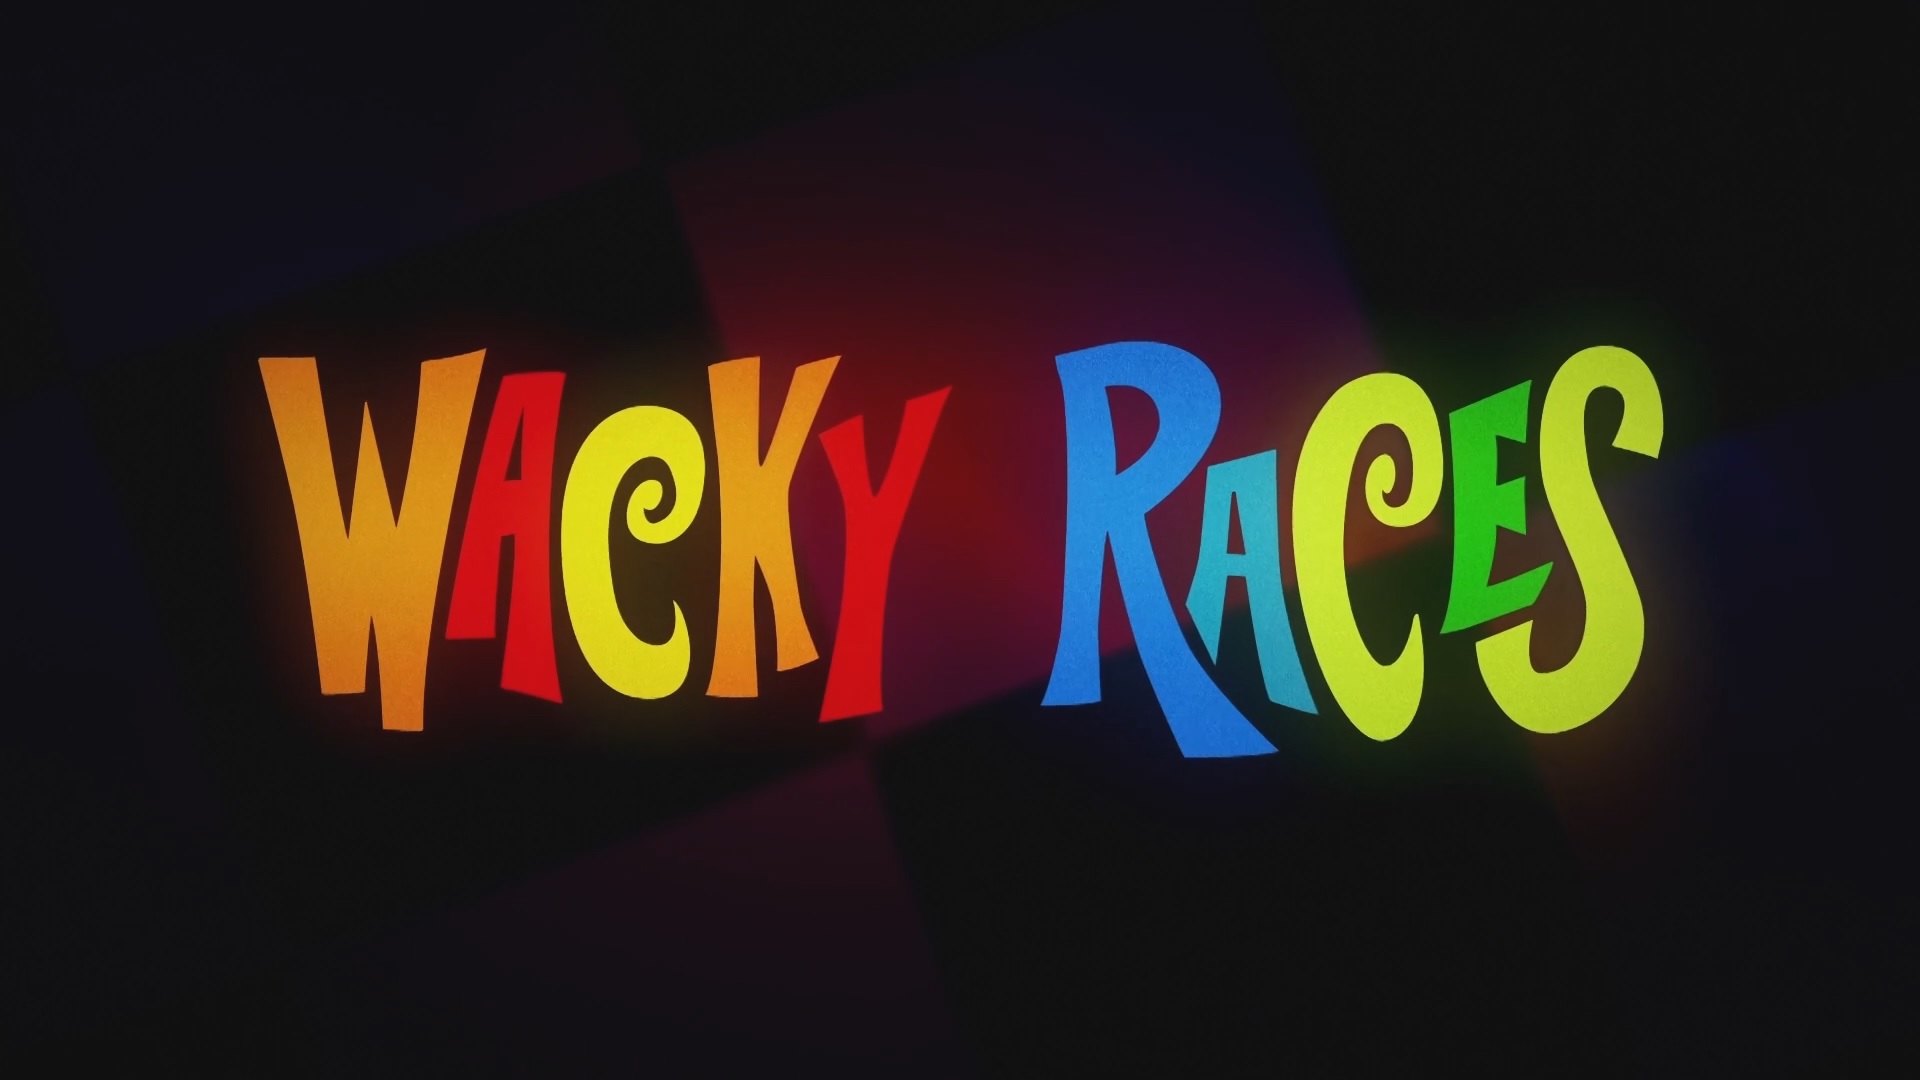 wacky-races-countdown-how-many-days-until-the-next-episode